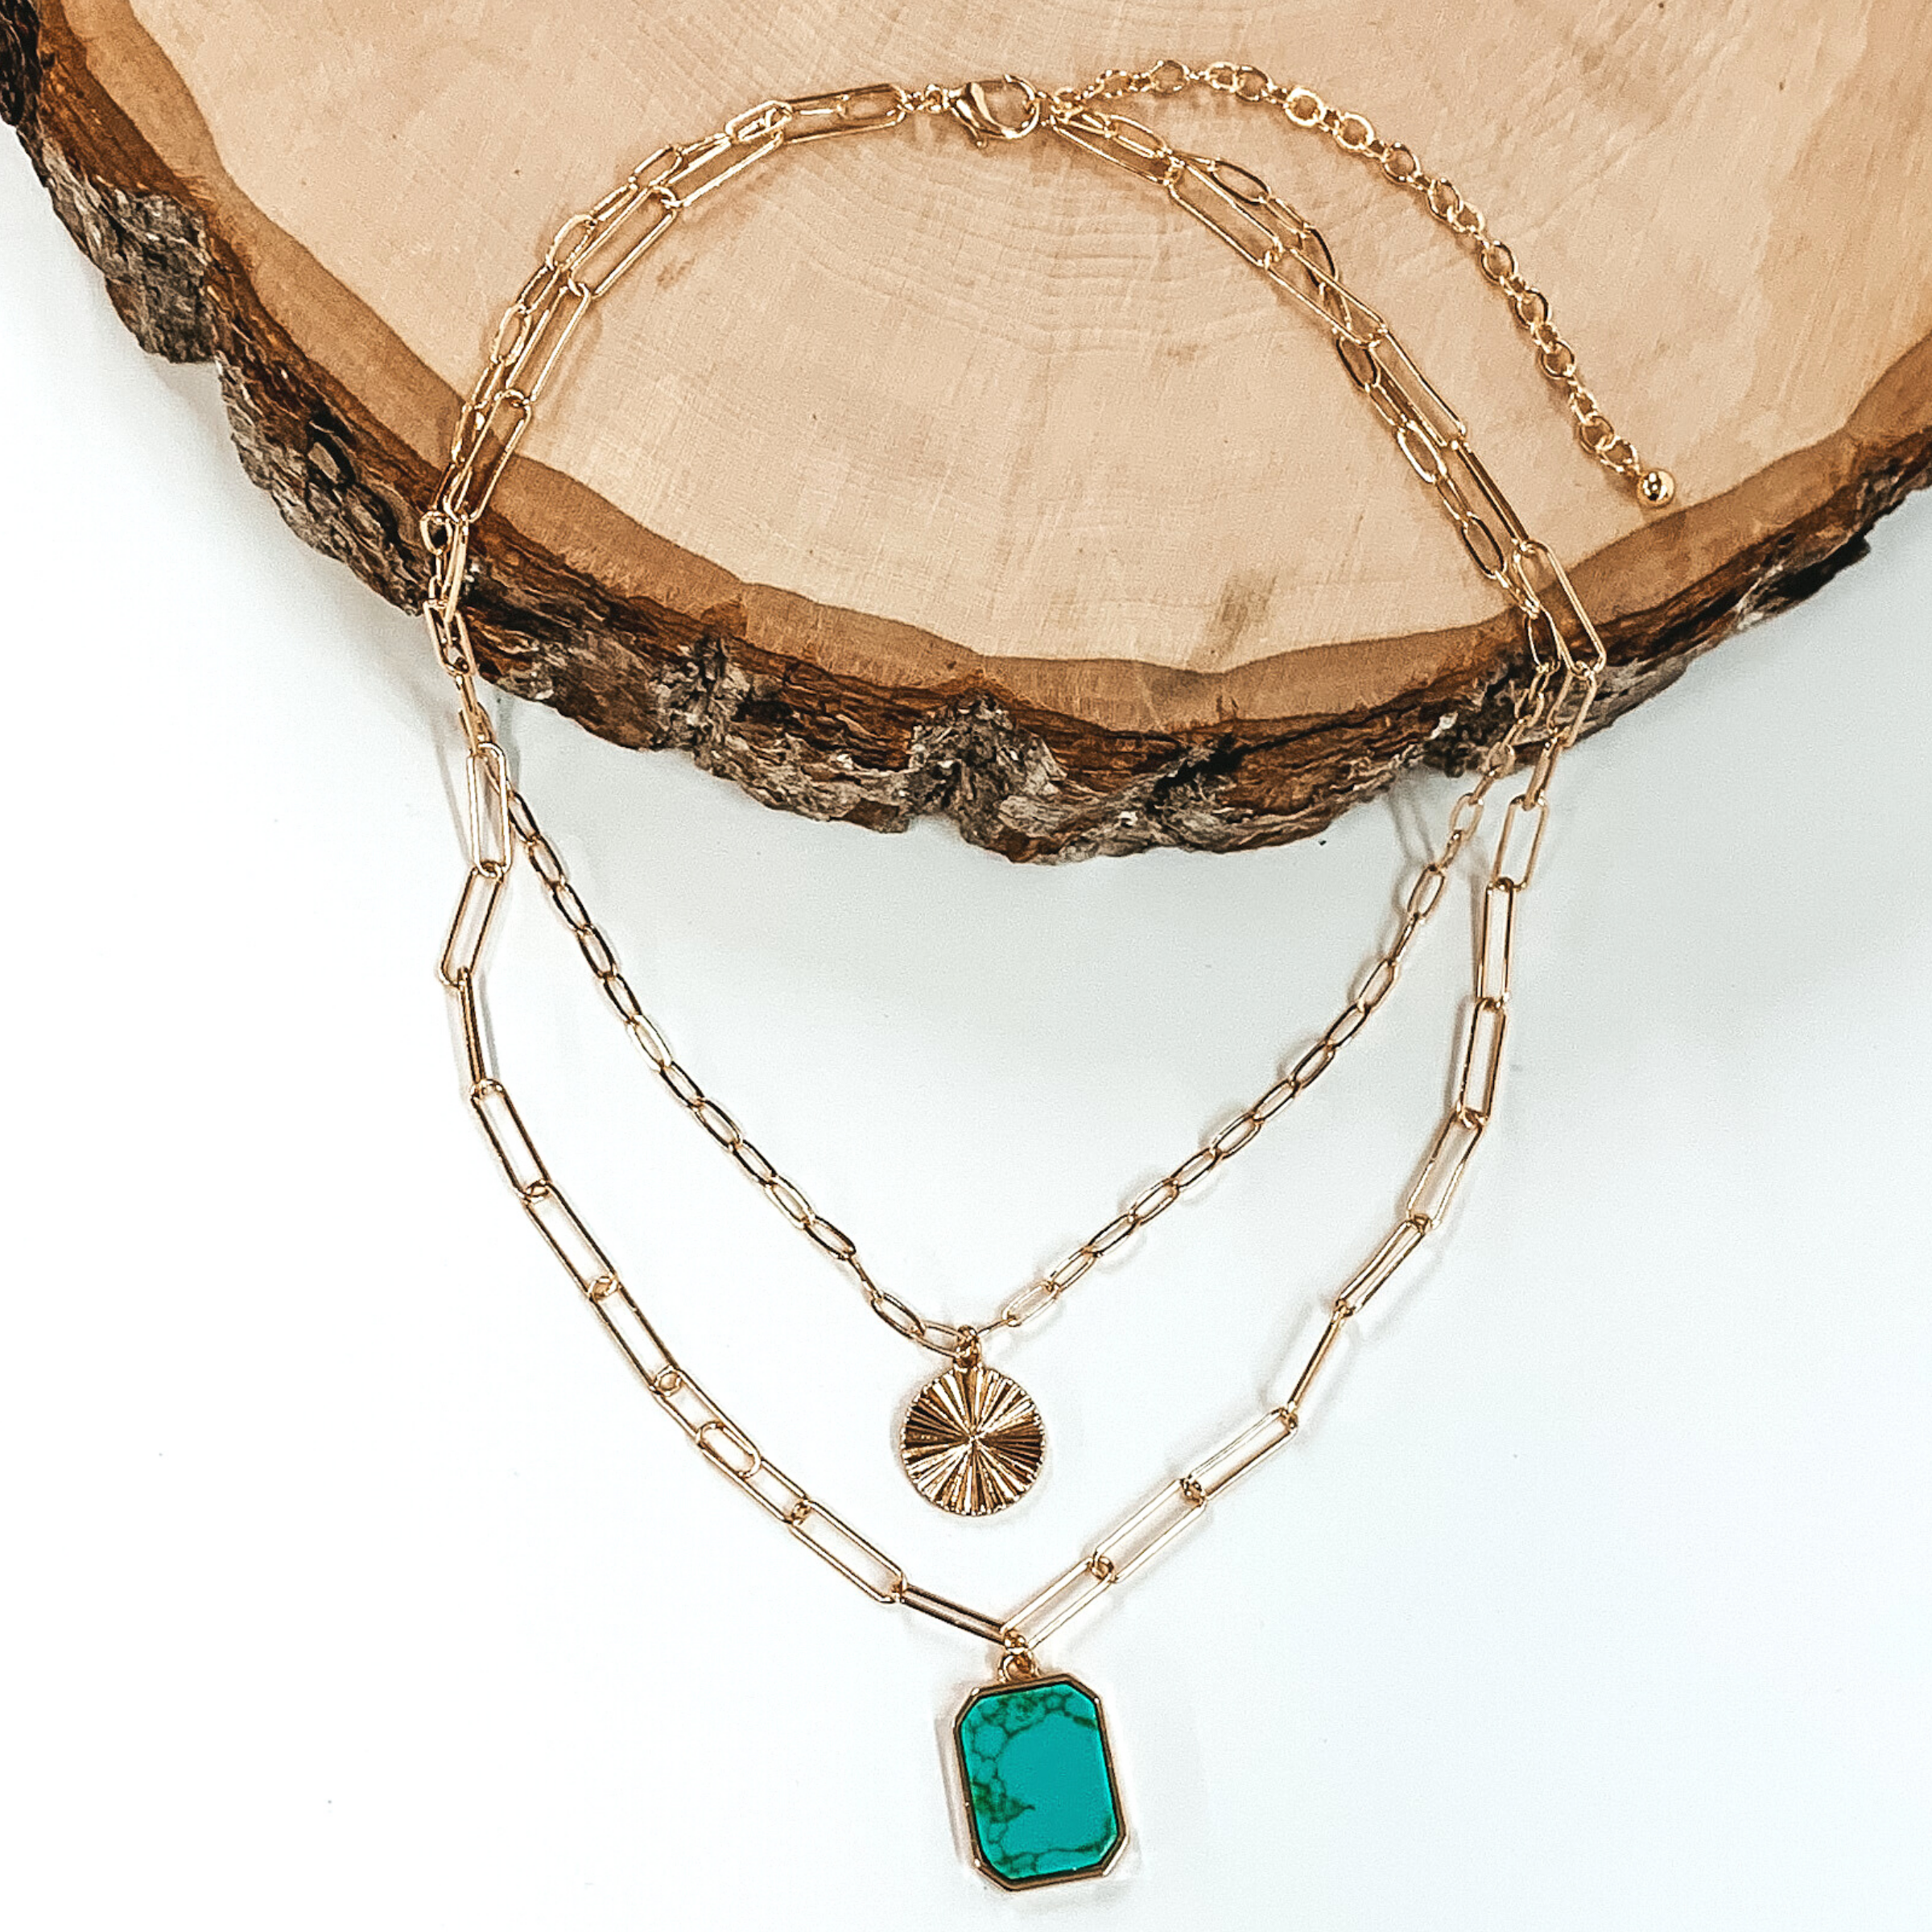 Double layered paperclip chain necklace in gold. The shorter strand has a gold circle pendant and the longer strand has a turquoise stone pendant in a long octagon shape. This necklace is half laying on a piece of wood and is pictured on a white background.